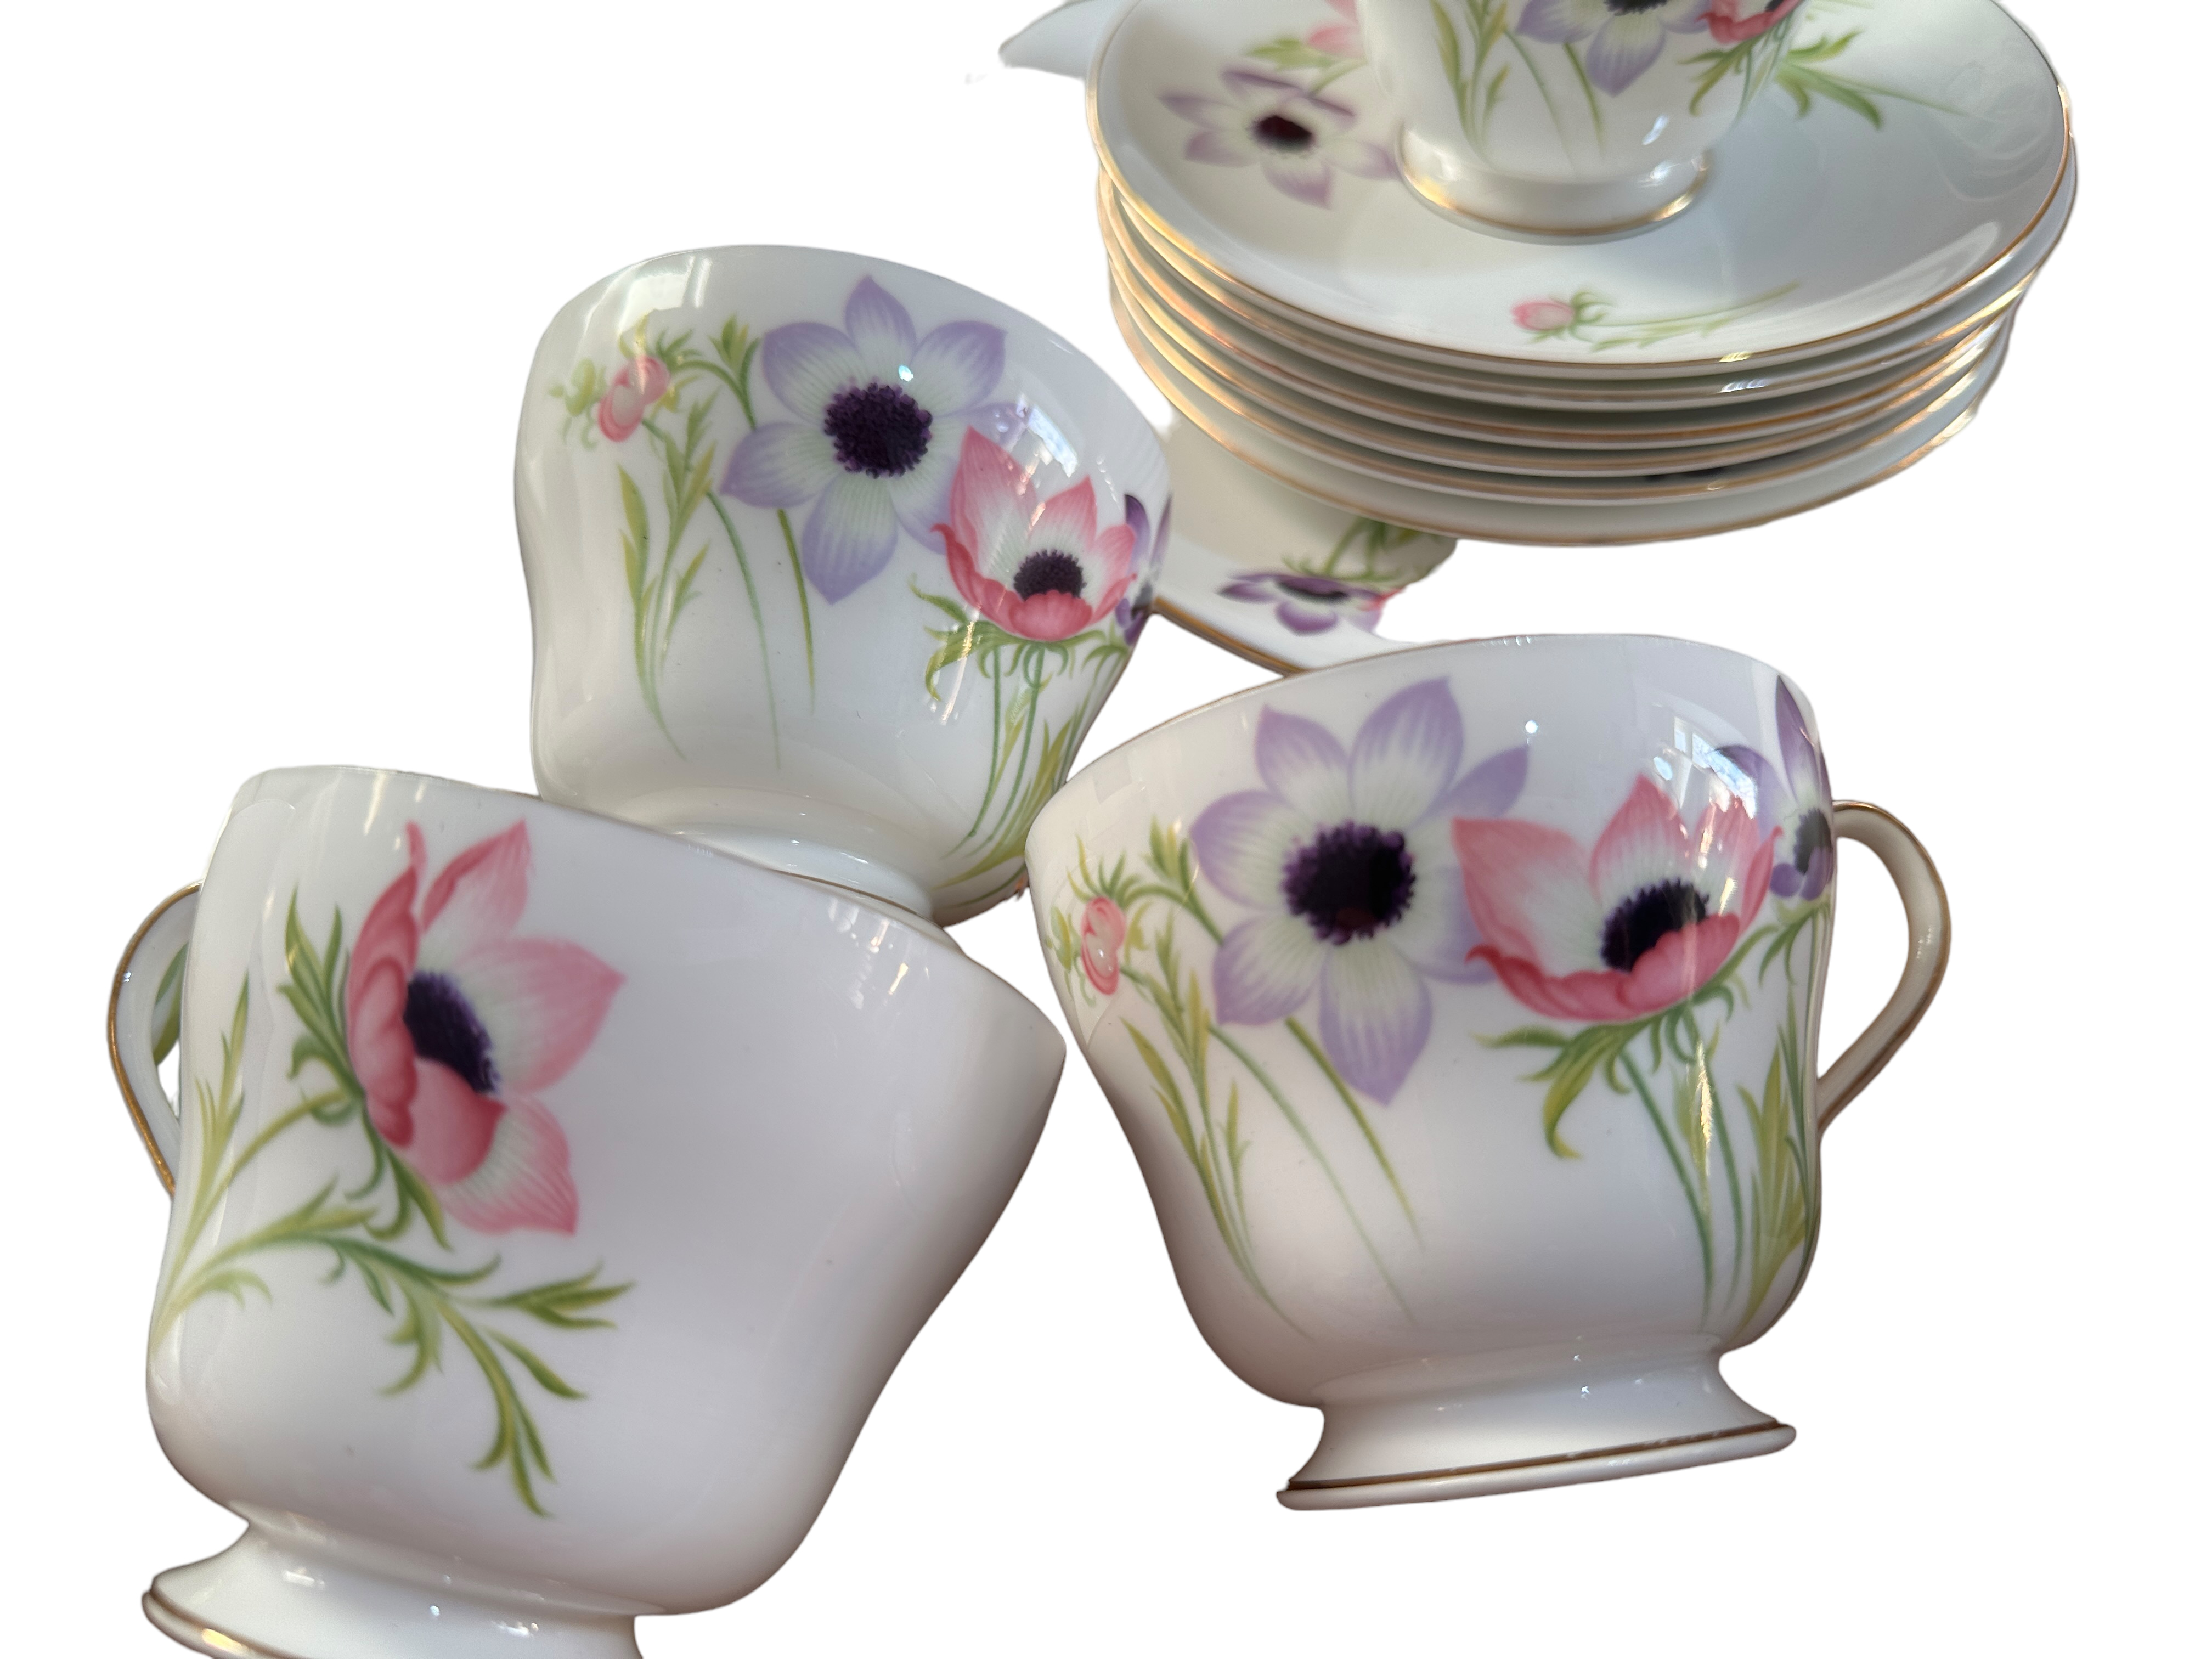 Vintage Shelley "Anemone Pattern" Teaset - 19 pieces. - Image 2 of 6